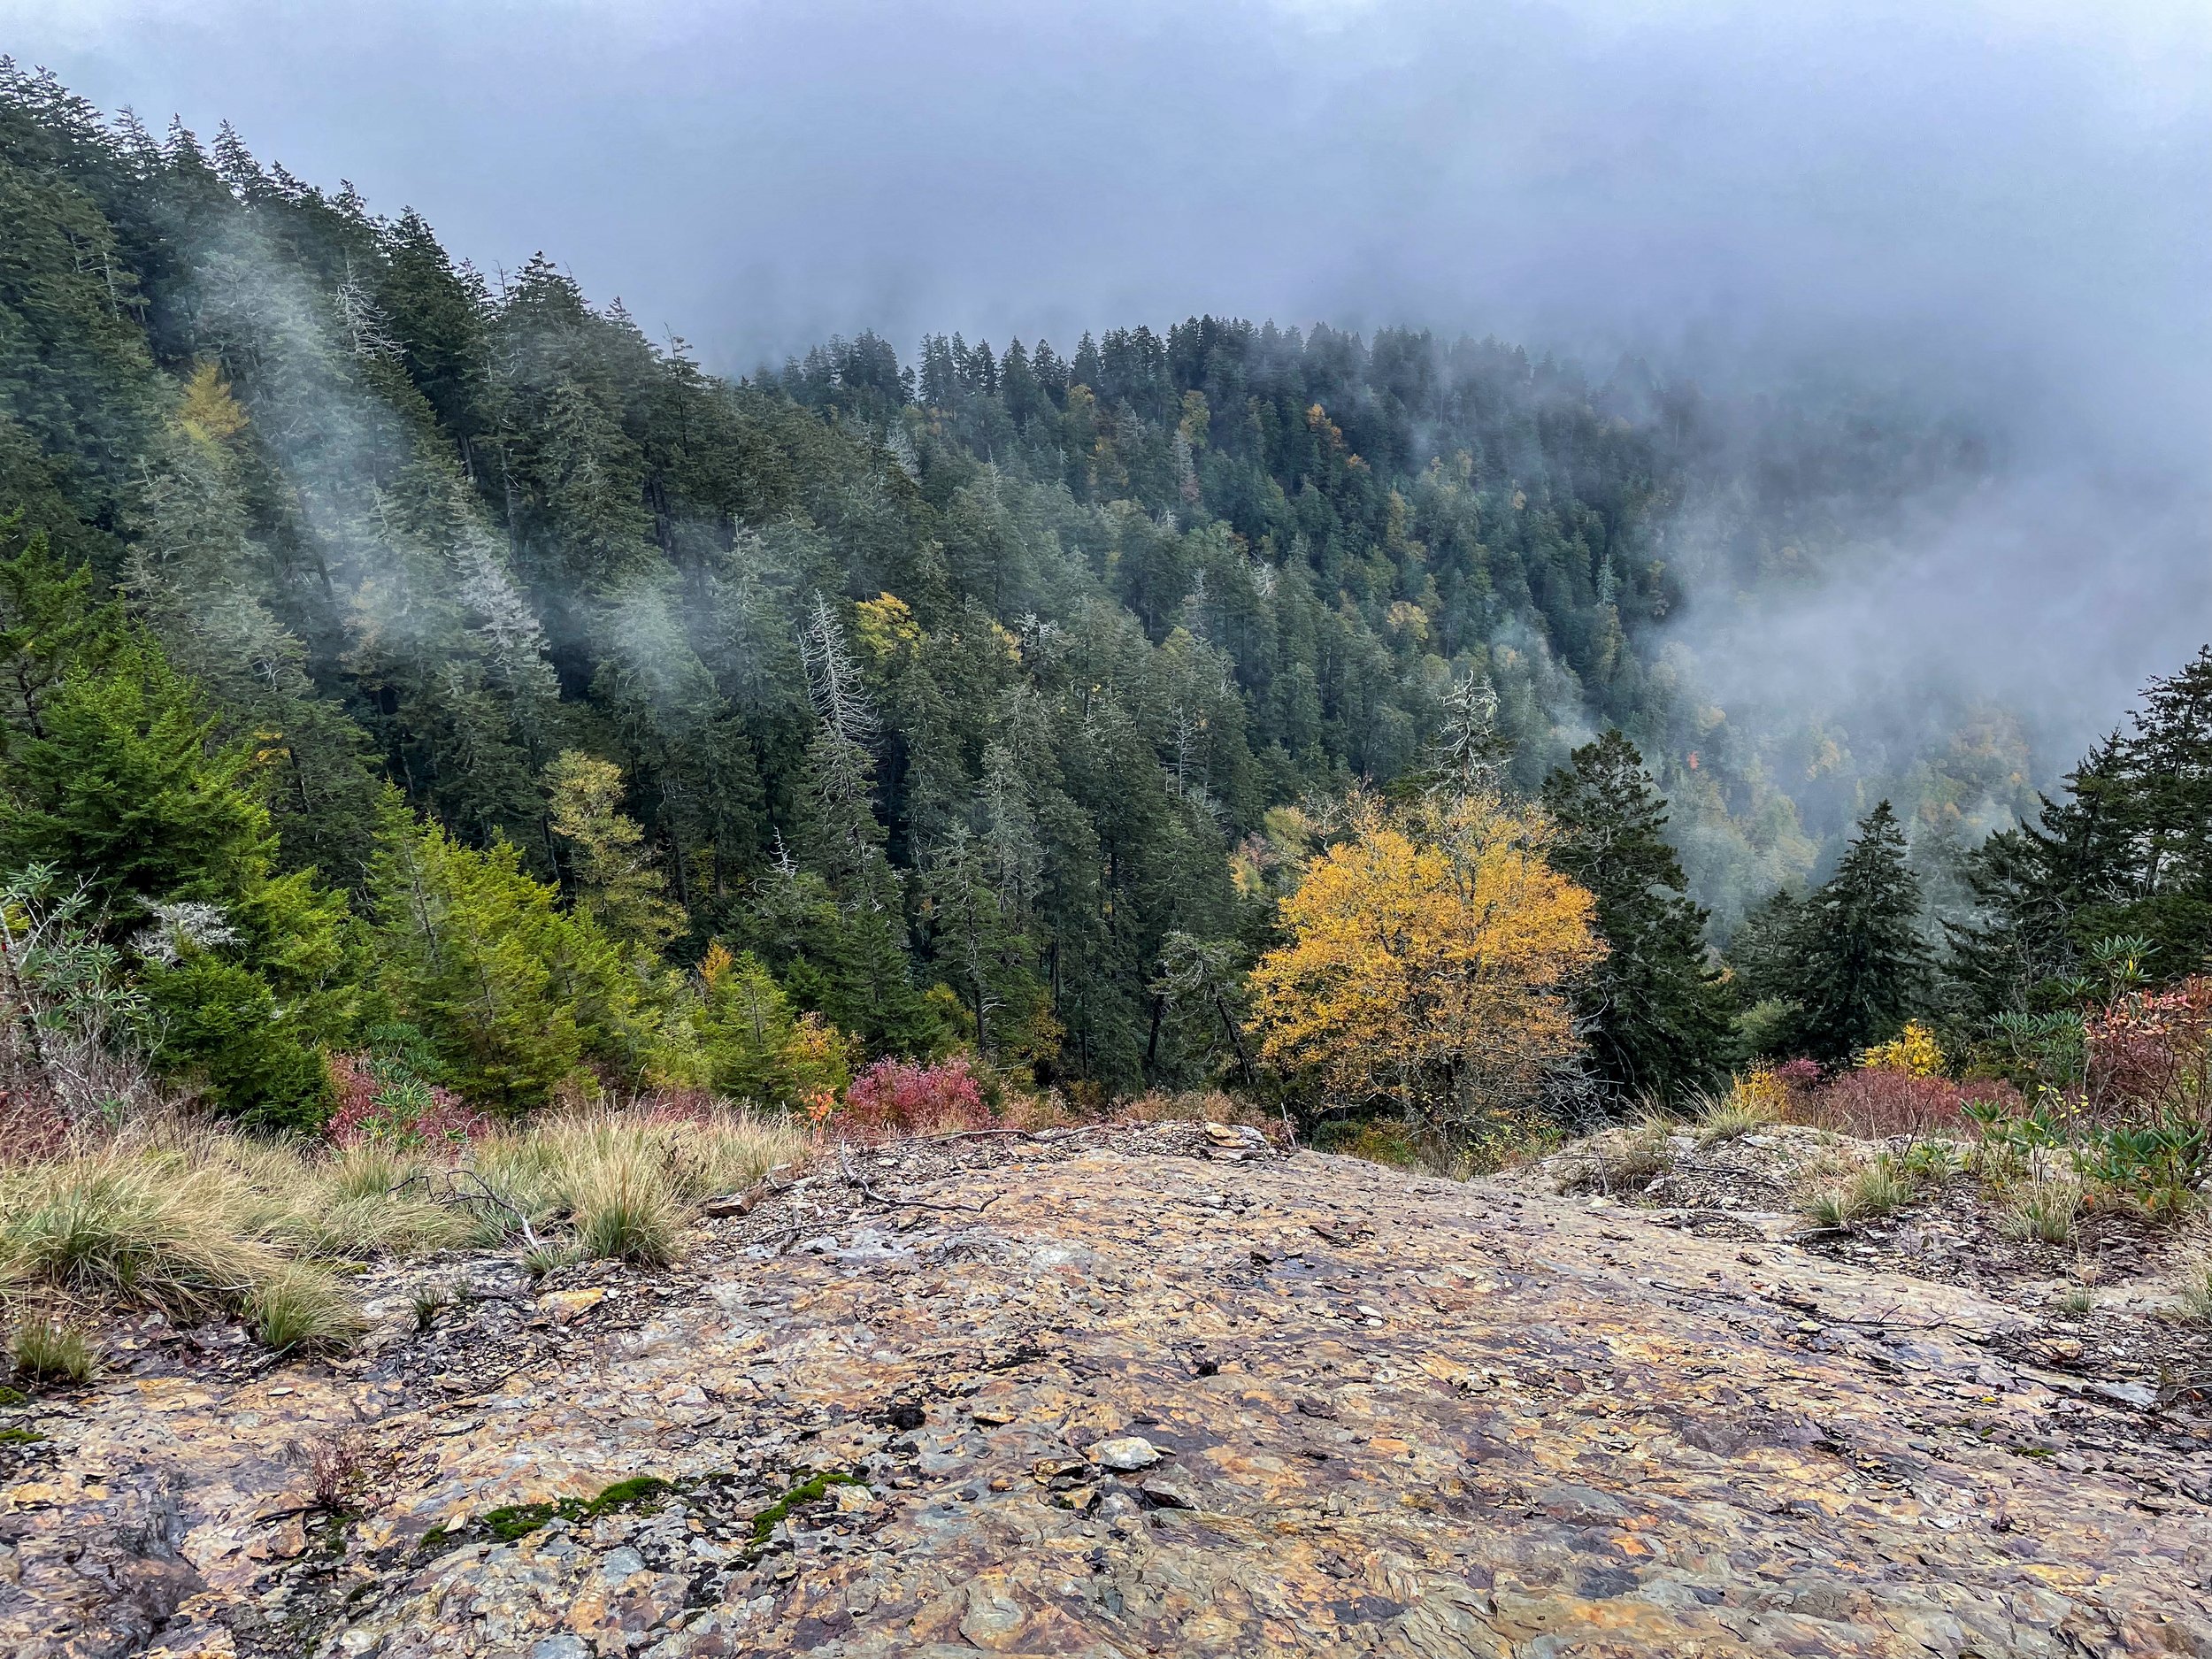  Along the trail to Mount LeConte, near the popular LeConte Lodge, the “smoke” of the Smoky Mountains often clings to bushes and treetops. Image credit: Jeffrey Rose, edits by Rachel Lense for The Science Writer 